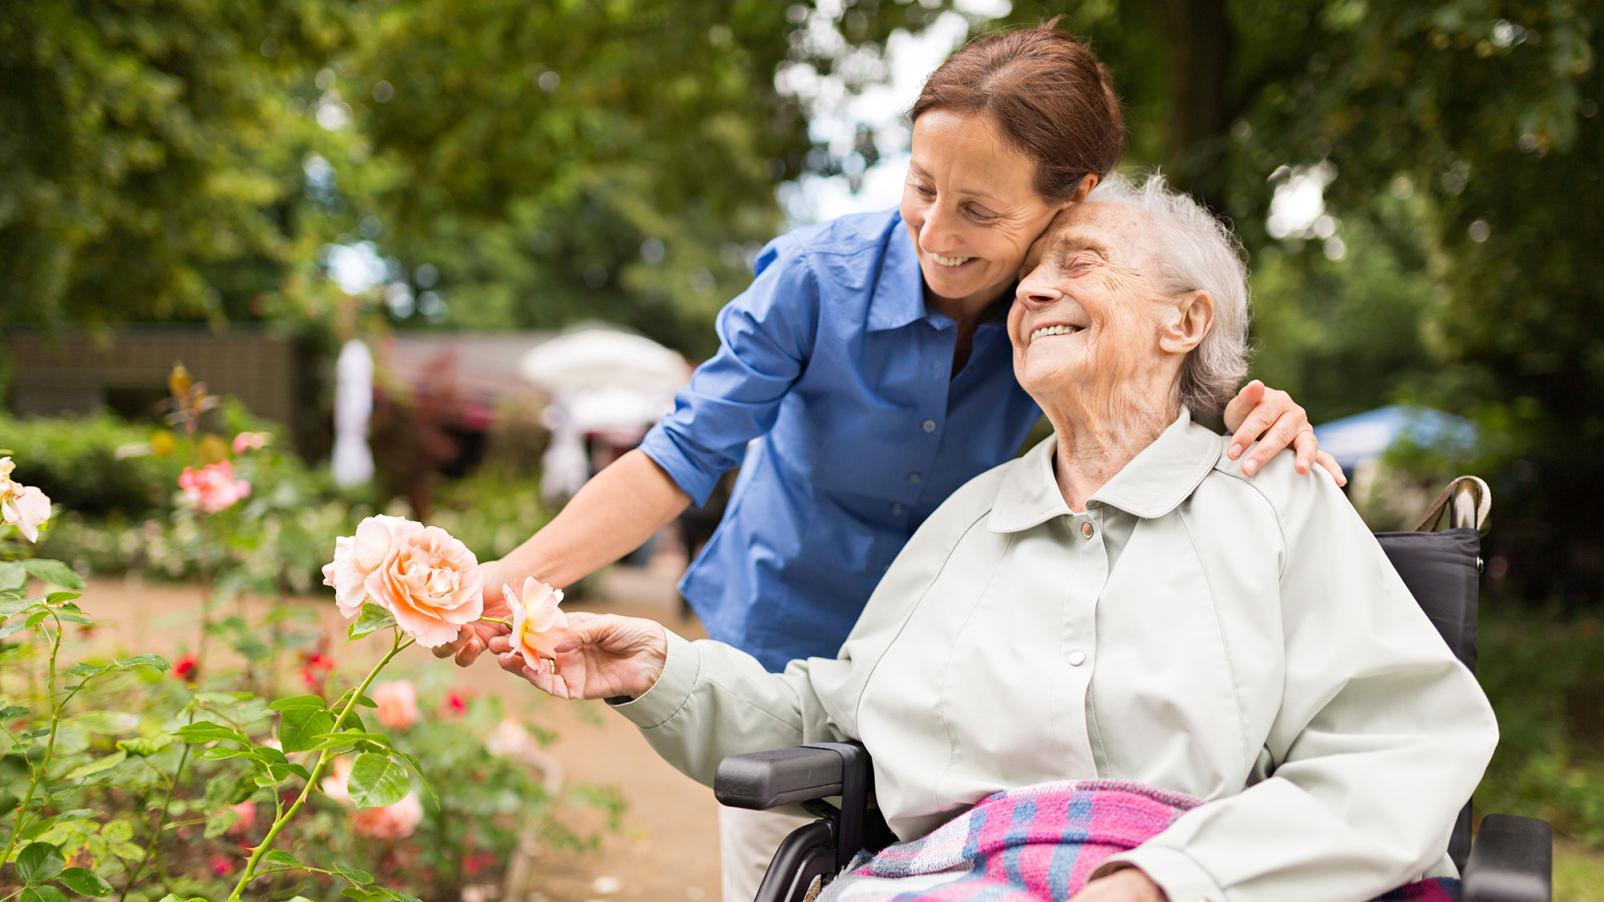 An elderly female in a wheelchair being hugged by a younger female in a garden, both smiling